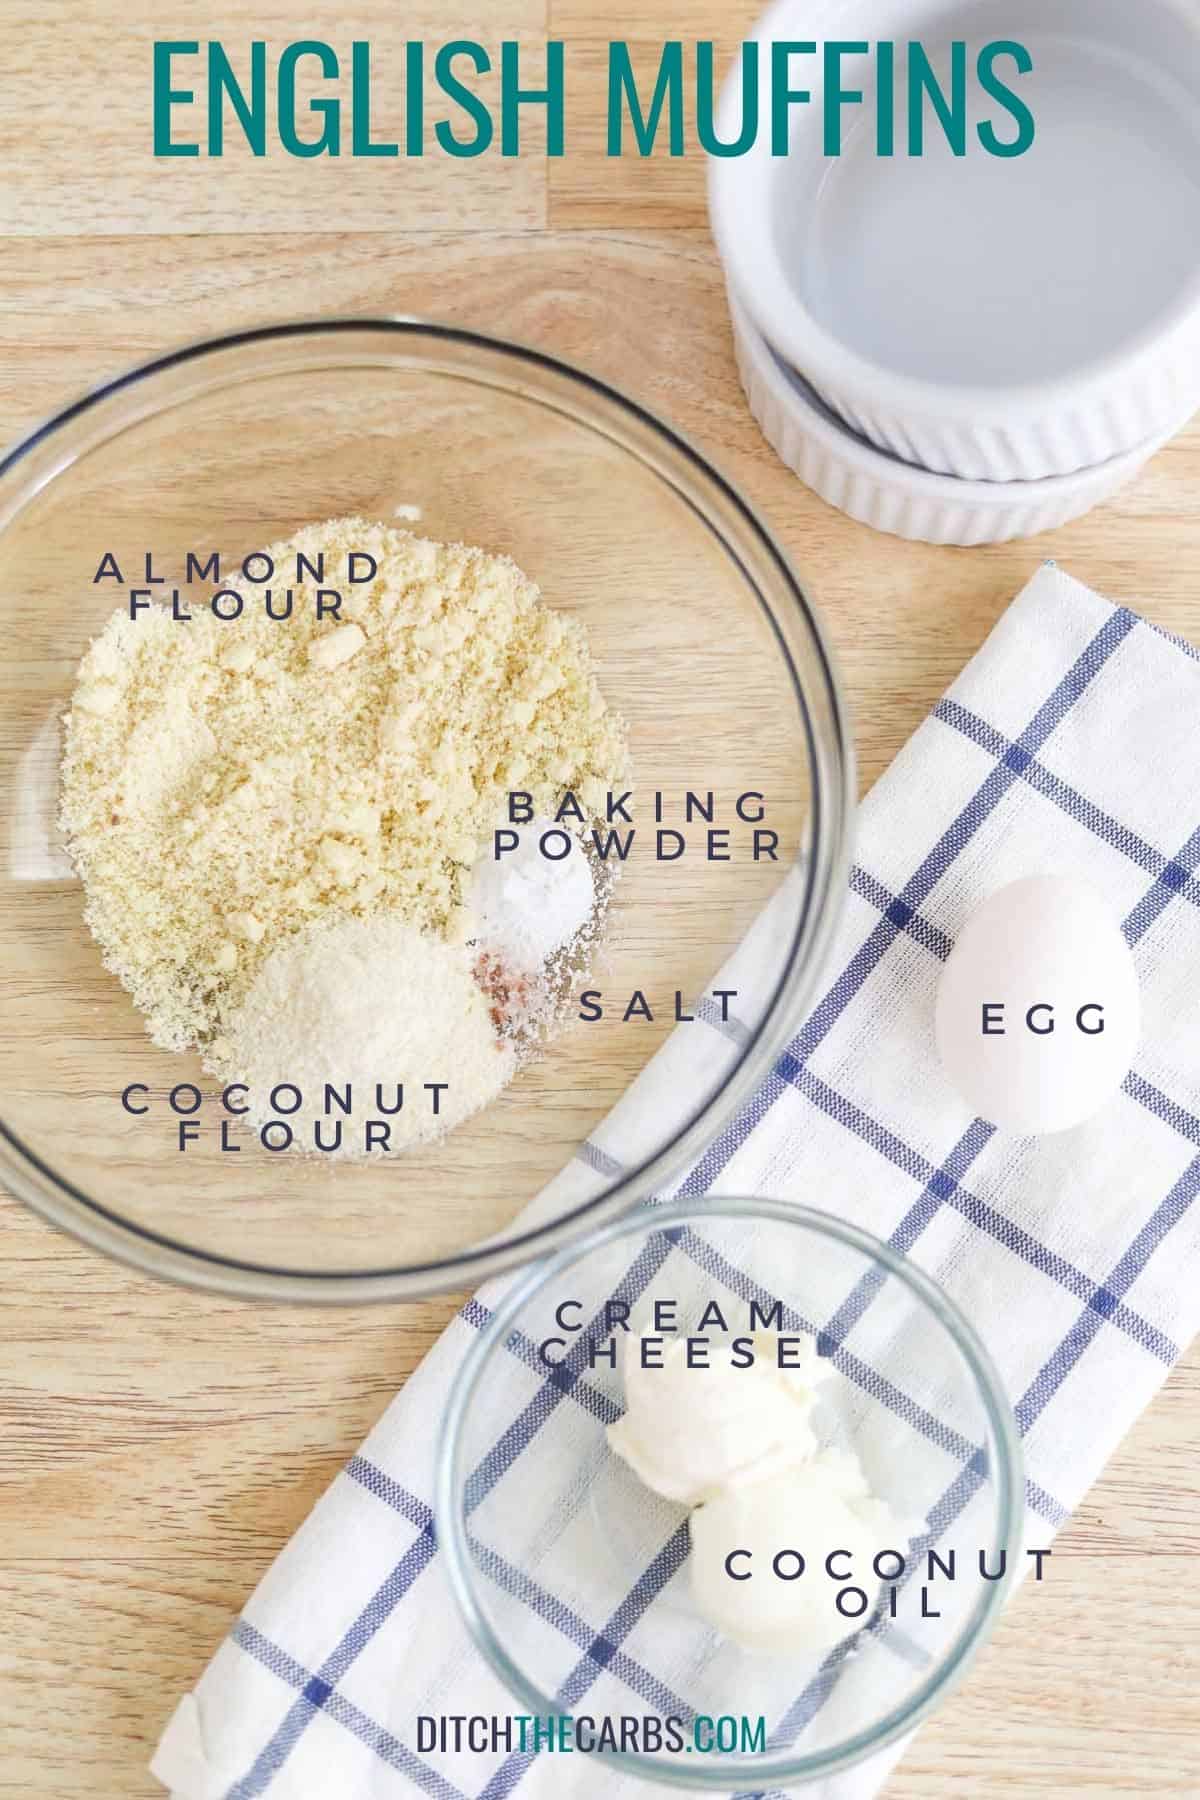 All the ingredients needed to make low-carb English muffins measured and ready to use.